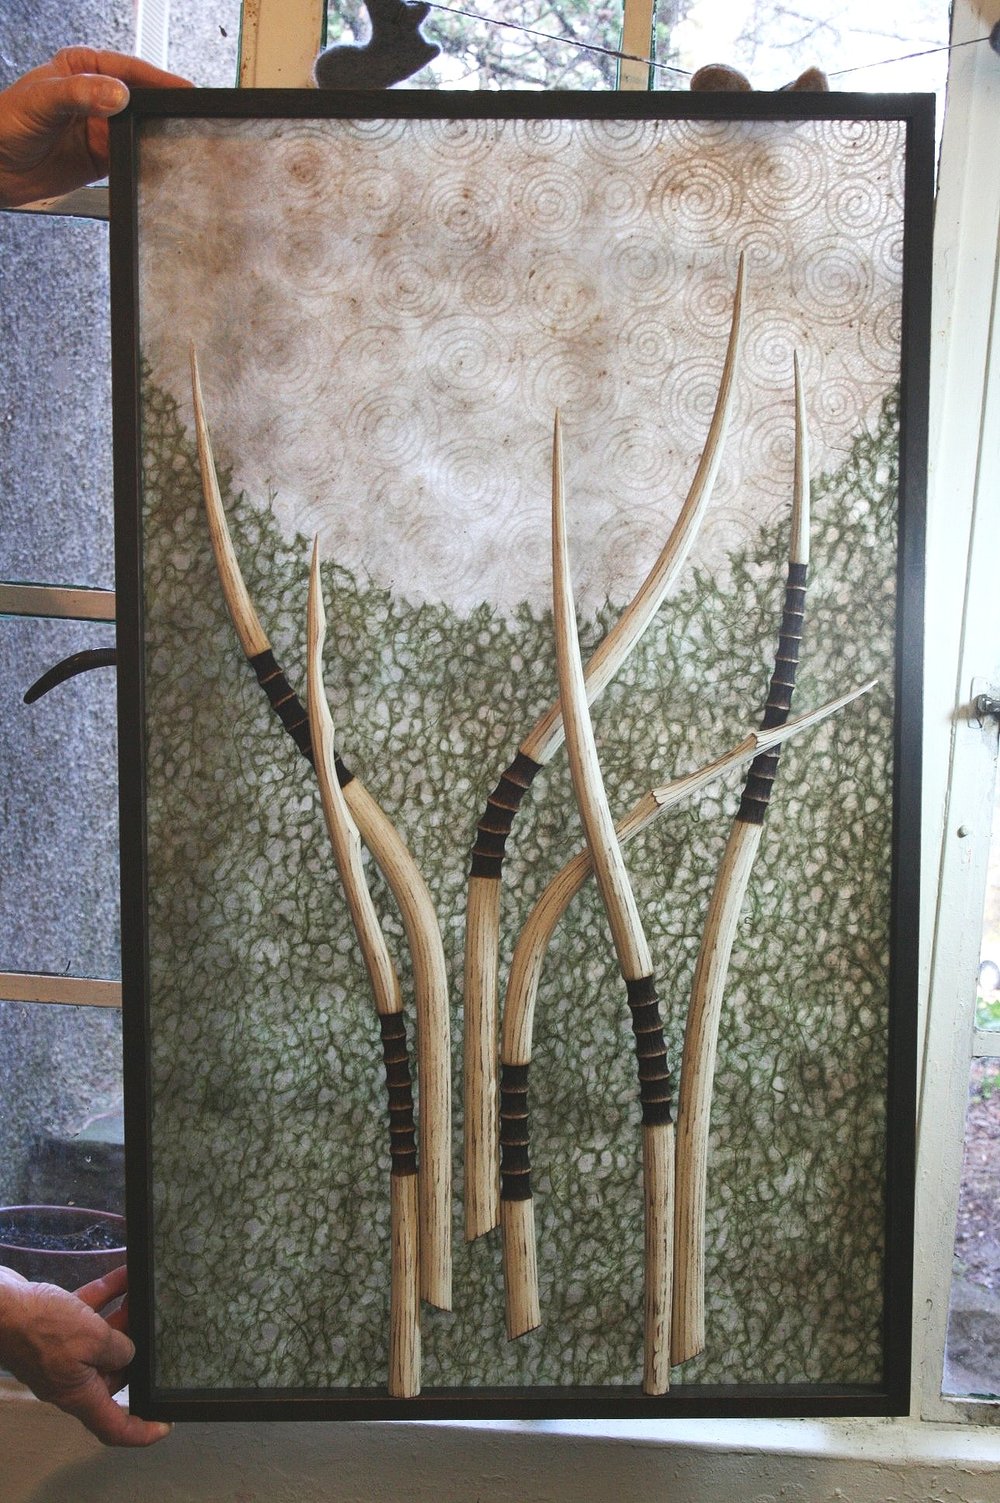  Commission Mel made for a client in Greensboro who collected some of her earliest pieces. Designed to cover a door window. Made from sculpted/painted/burned wood, mica, paper.  Very pagan, forest feel to this piece. 